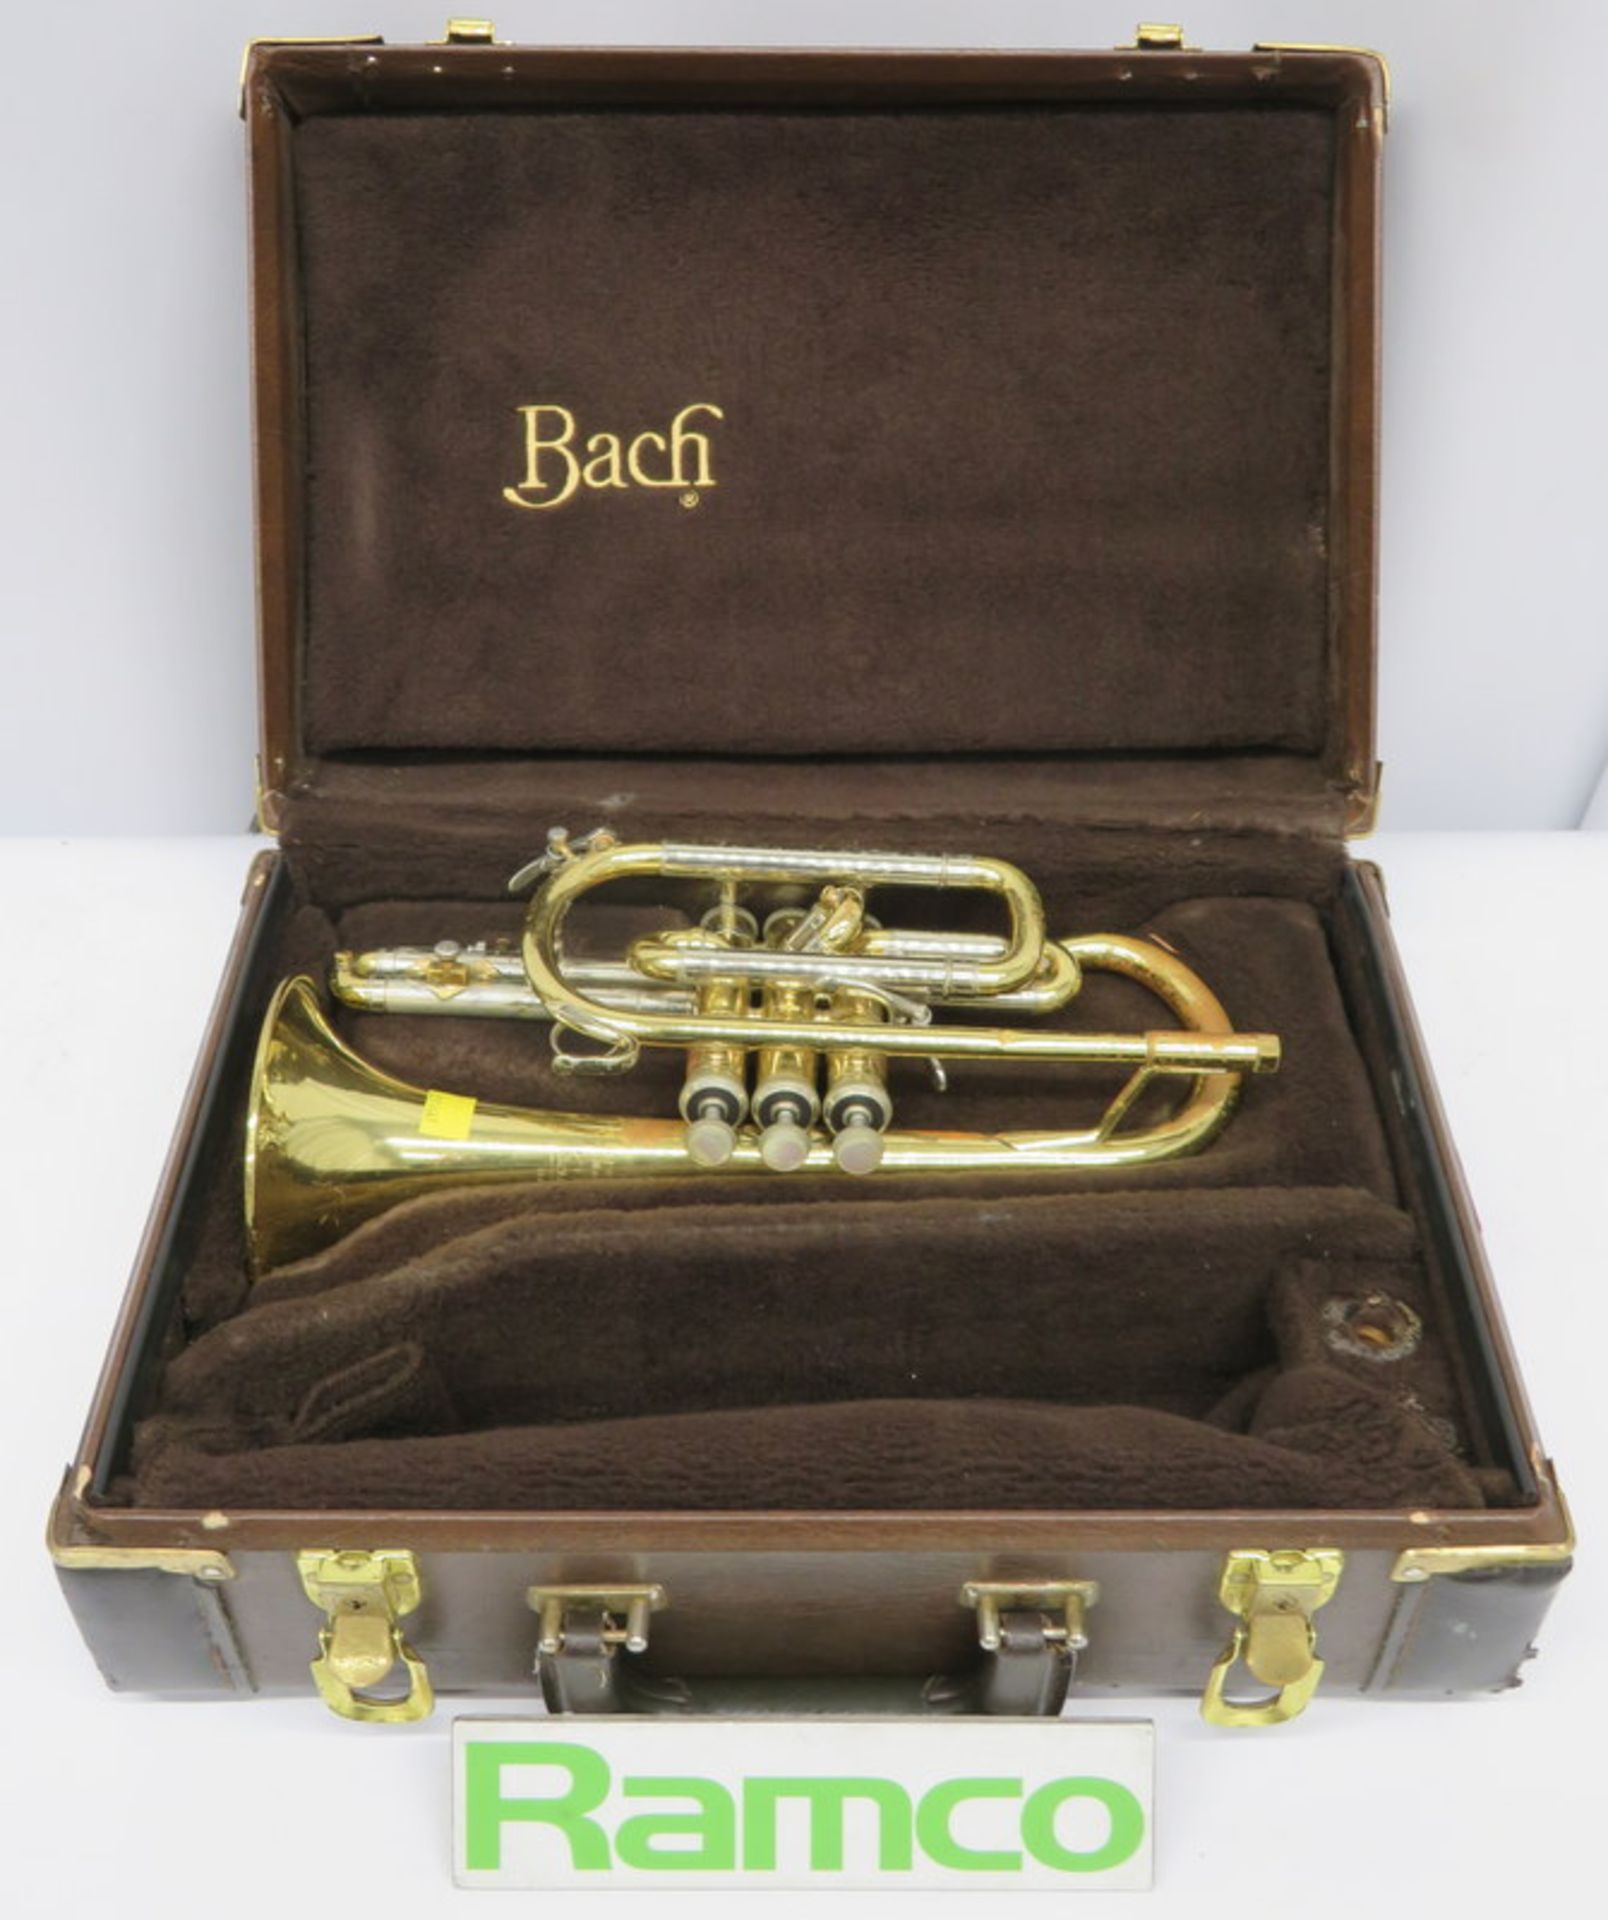 Bach Stradivarius 184 Cornet With Case. Serial Number: 547038. Please Note That This Item